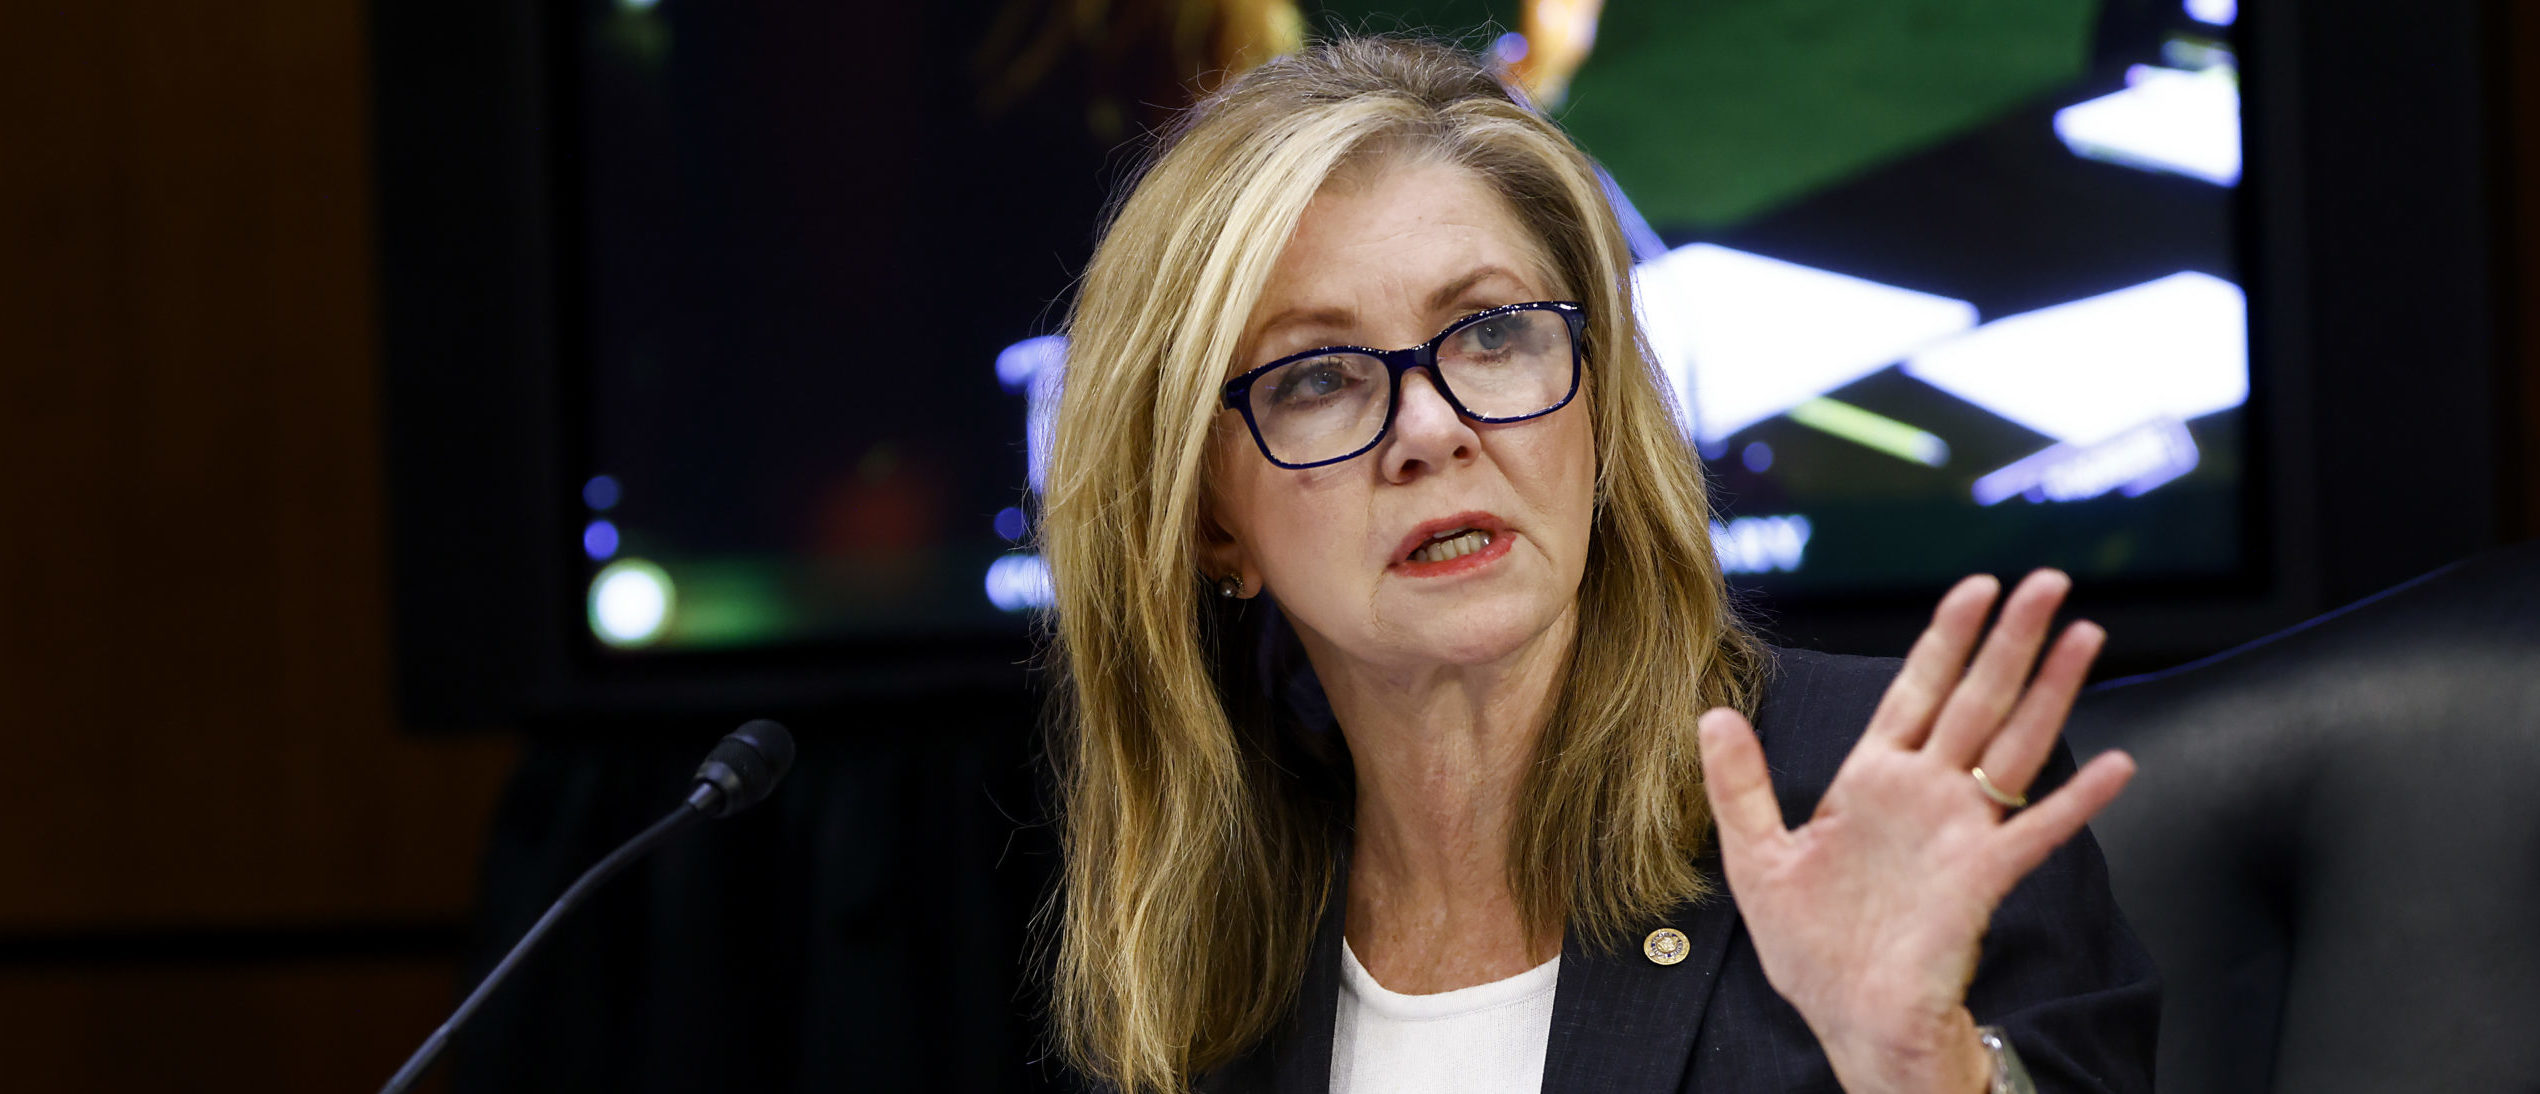 Sen. Marsha Blackburn (R-TN), speaks during the Senate Judiciary Committee confirmation hearing for Supreme Court nominee Judge Amy Coney Barrett on Capitol Hill on October 13, 2020 in Washington, DC. (Samuel Corum/Getty Images)